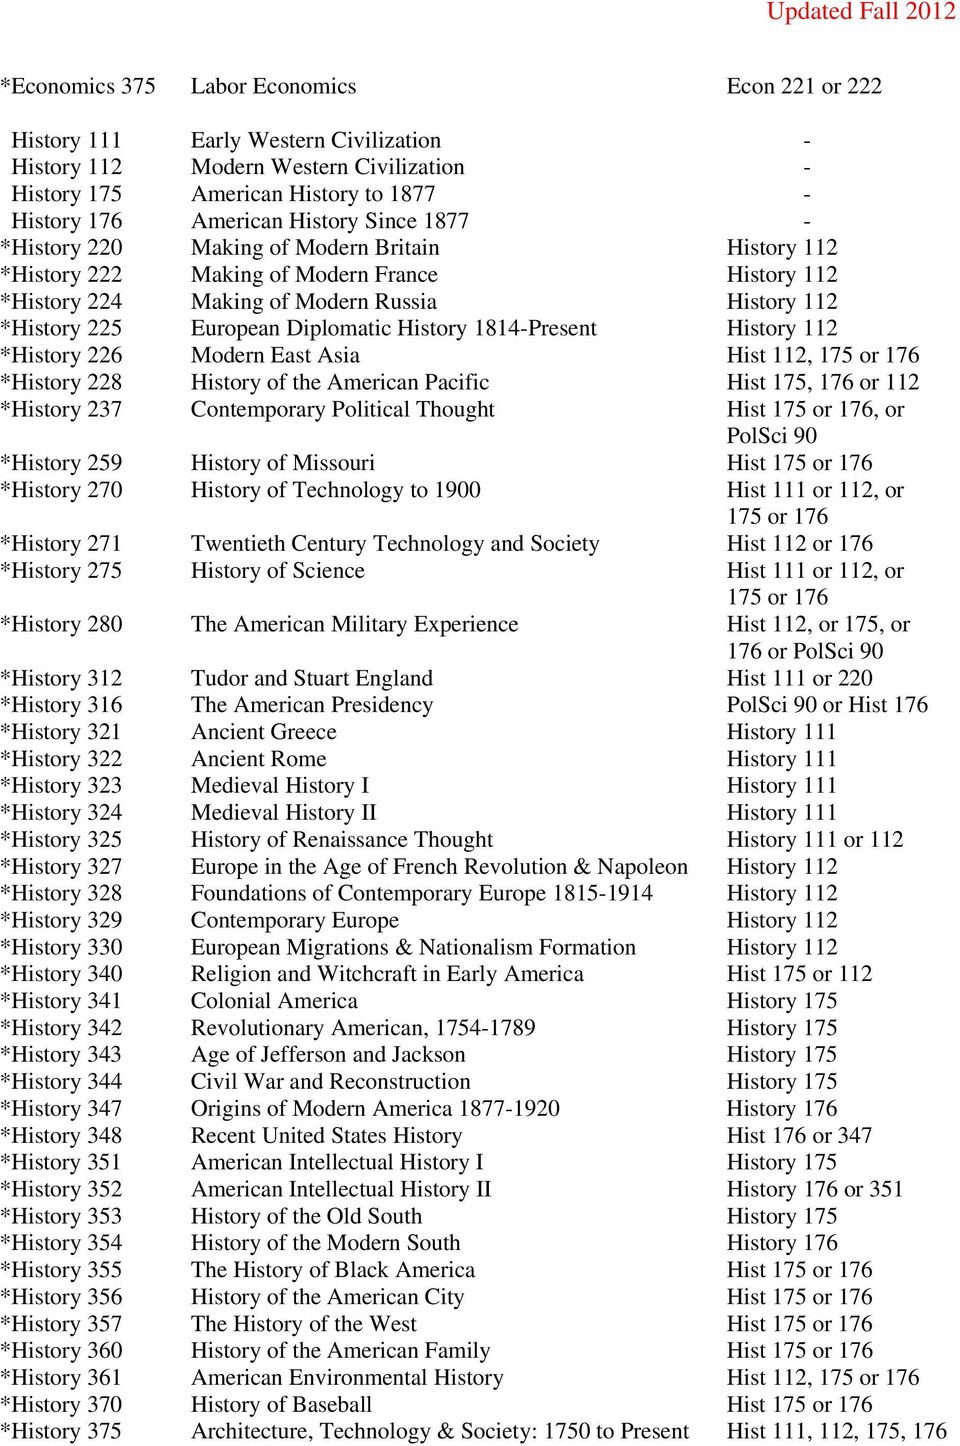 History 1814-Present History 112 *History 226 Modern East Asia Hist 112, 175 or 176 *History 228 History of the American Pacific Hist 175, 176 or 112 *History 237 Contemporary Political Thought Hist